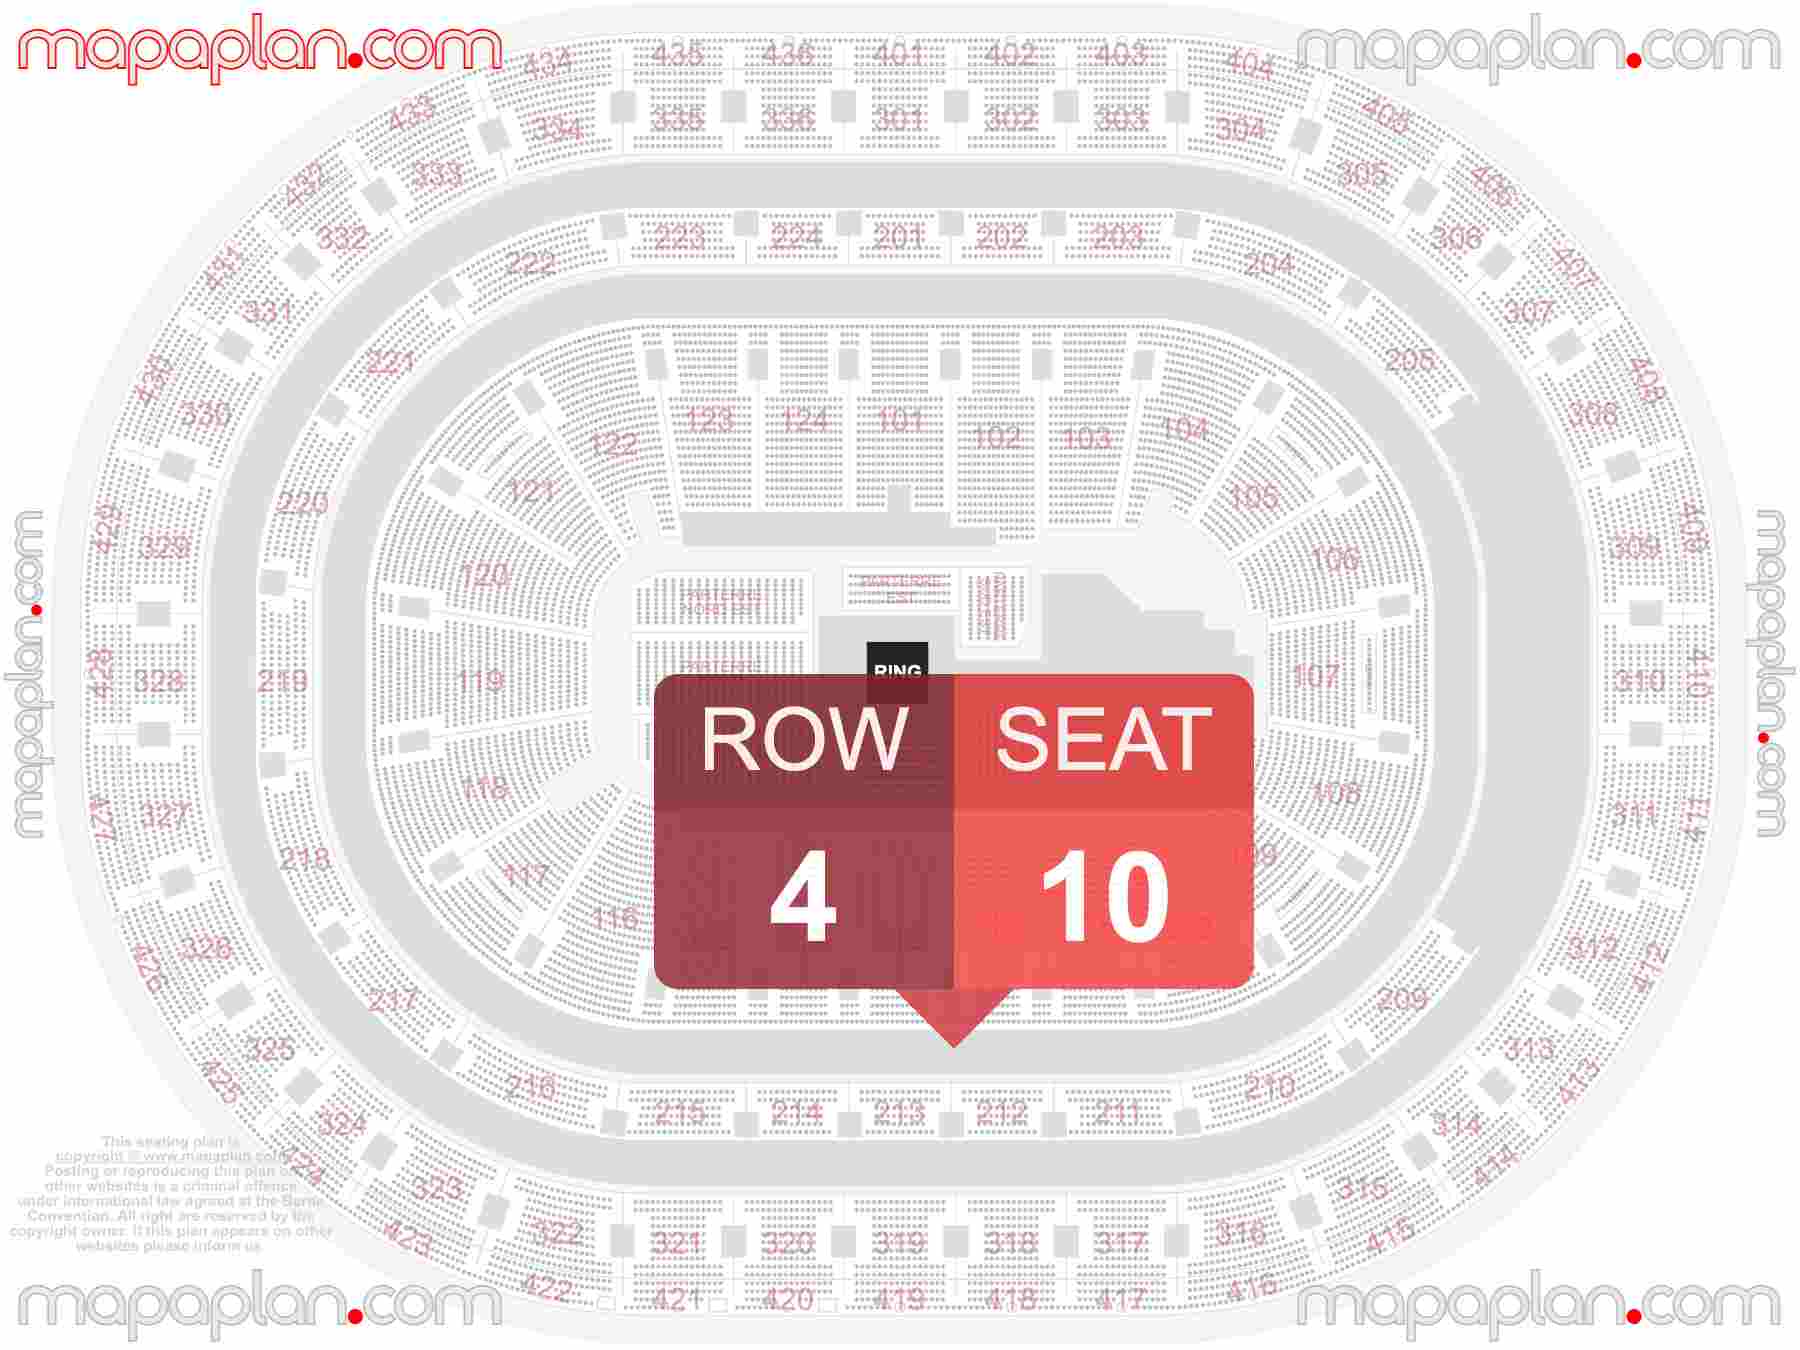 Montreal Bell Centre seating map WWE wrestling & boxing seating chart - Interactive map to find best seat and row numbers